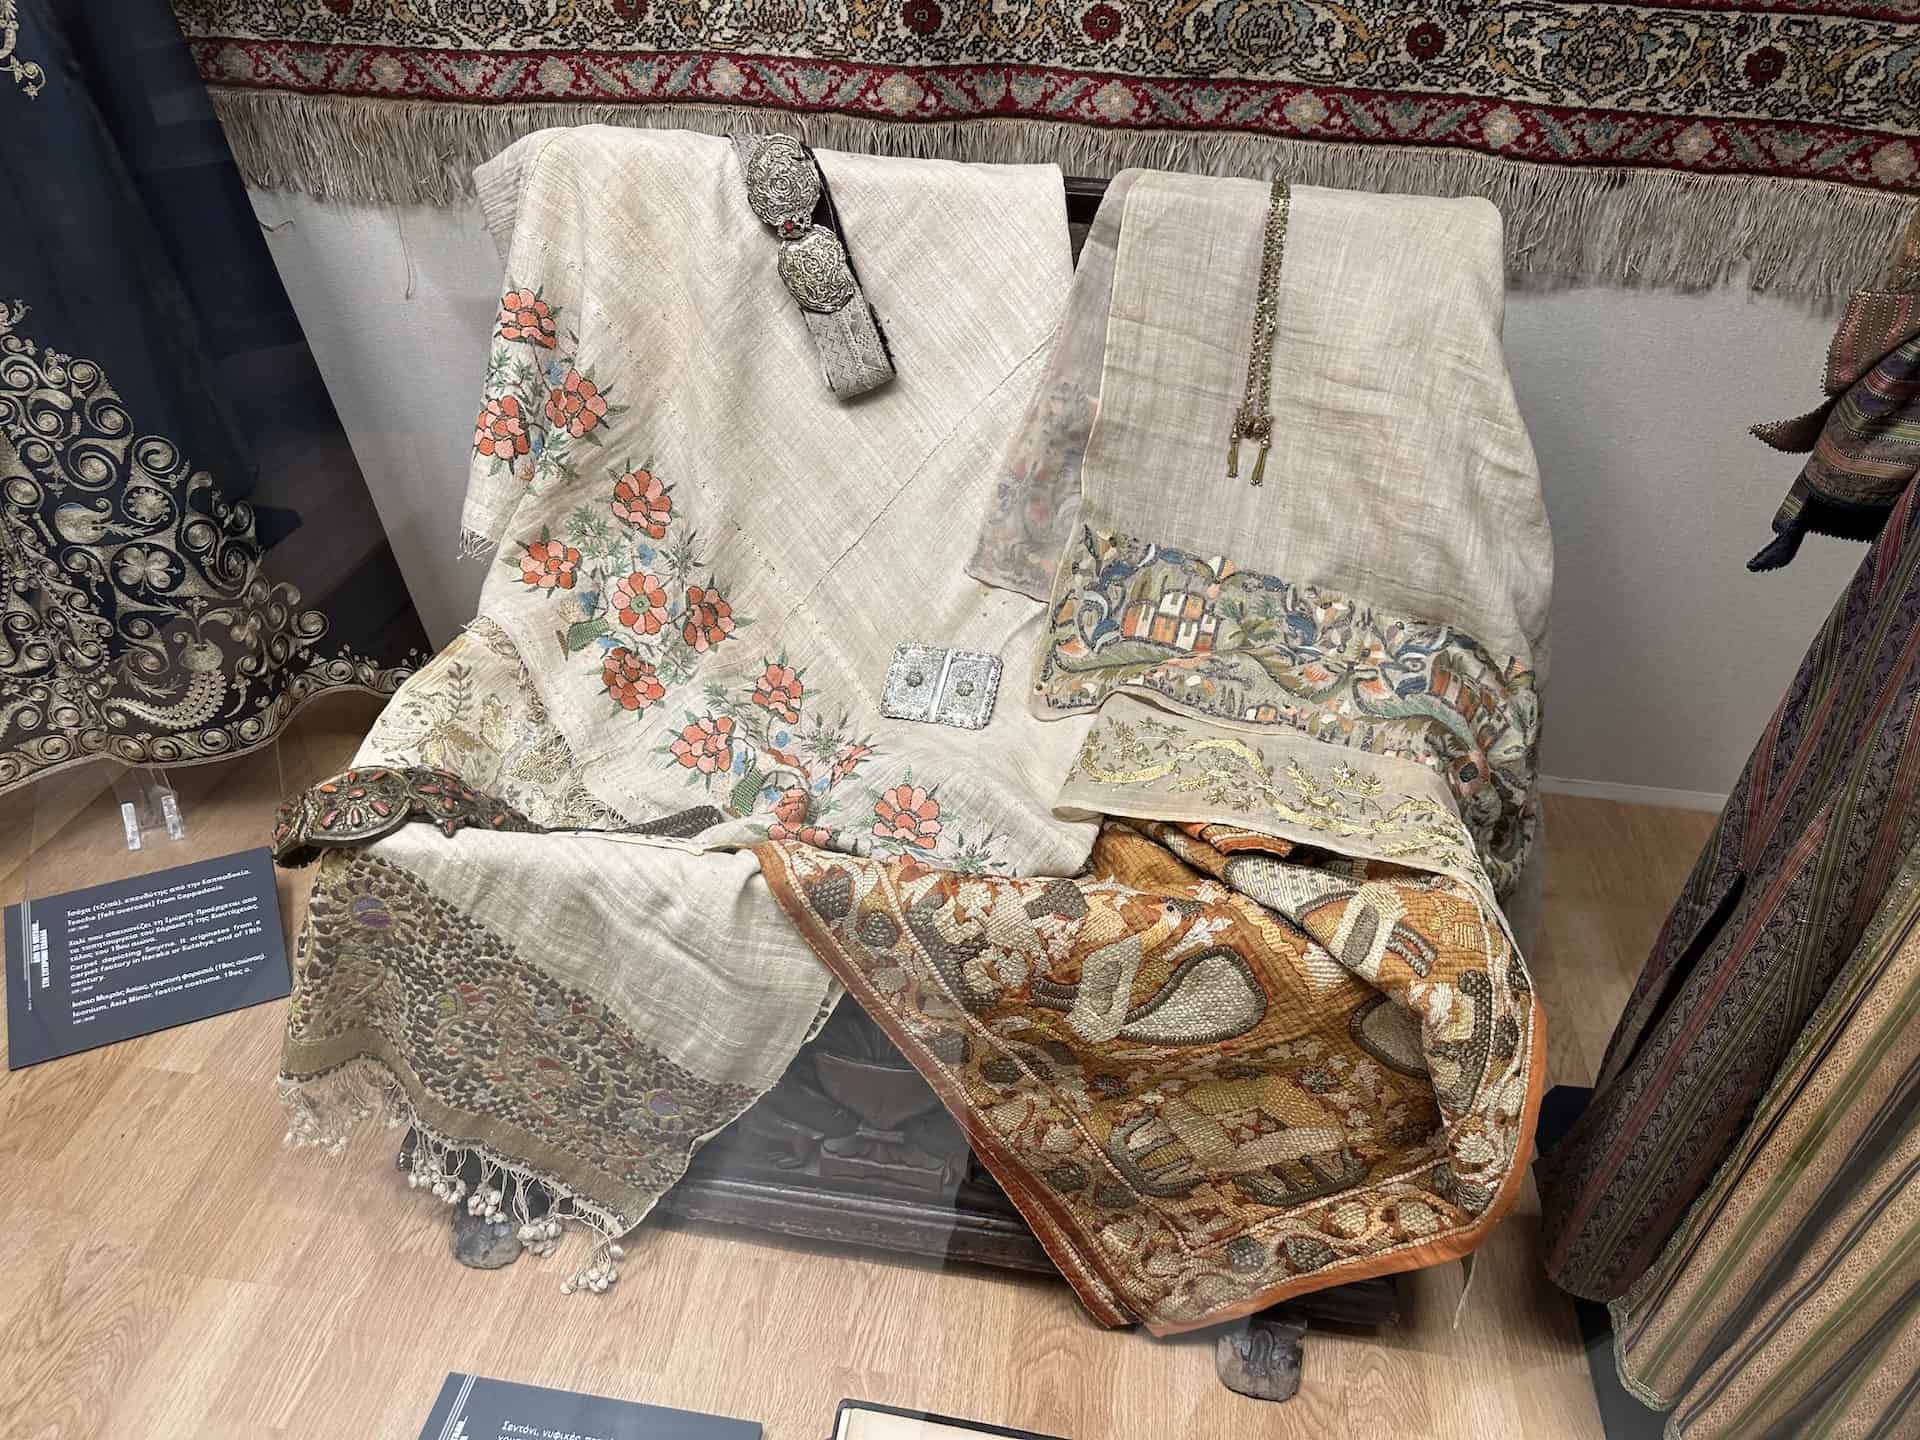 Sheet, wedding towels, tsevres, gold embroidered scarf, and silk covering; belt with buckle from Saframpolis (Safranbolu); belt with buckle; silver buckle; jewelry with a butterfly